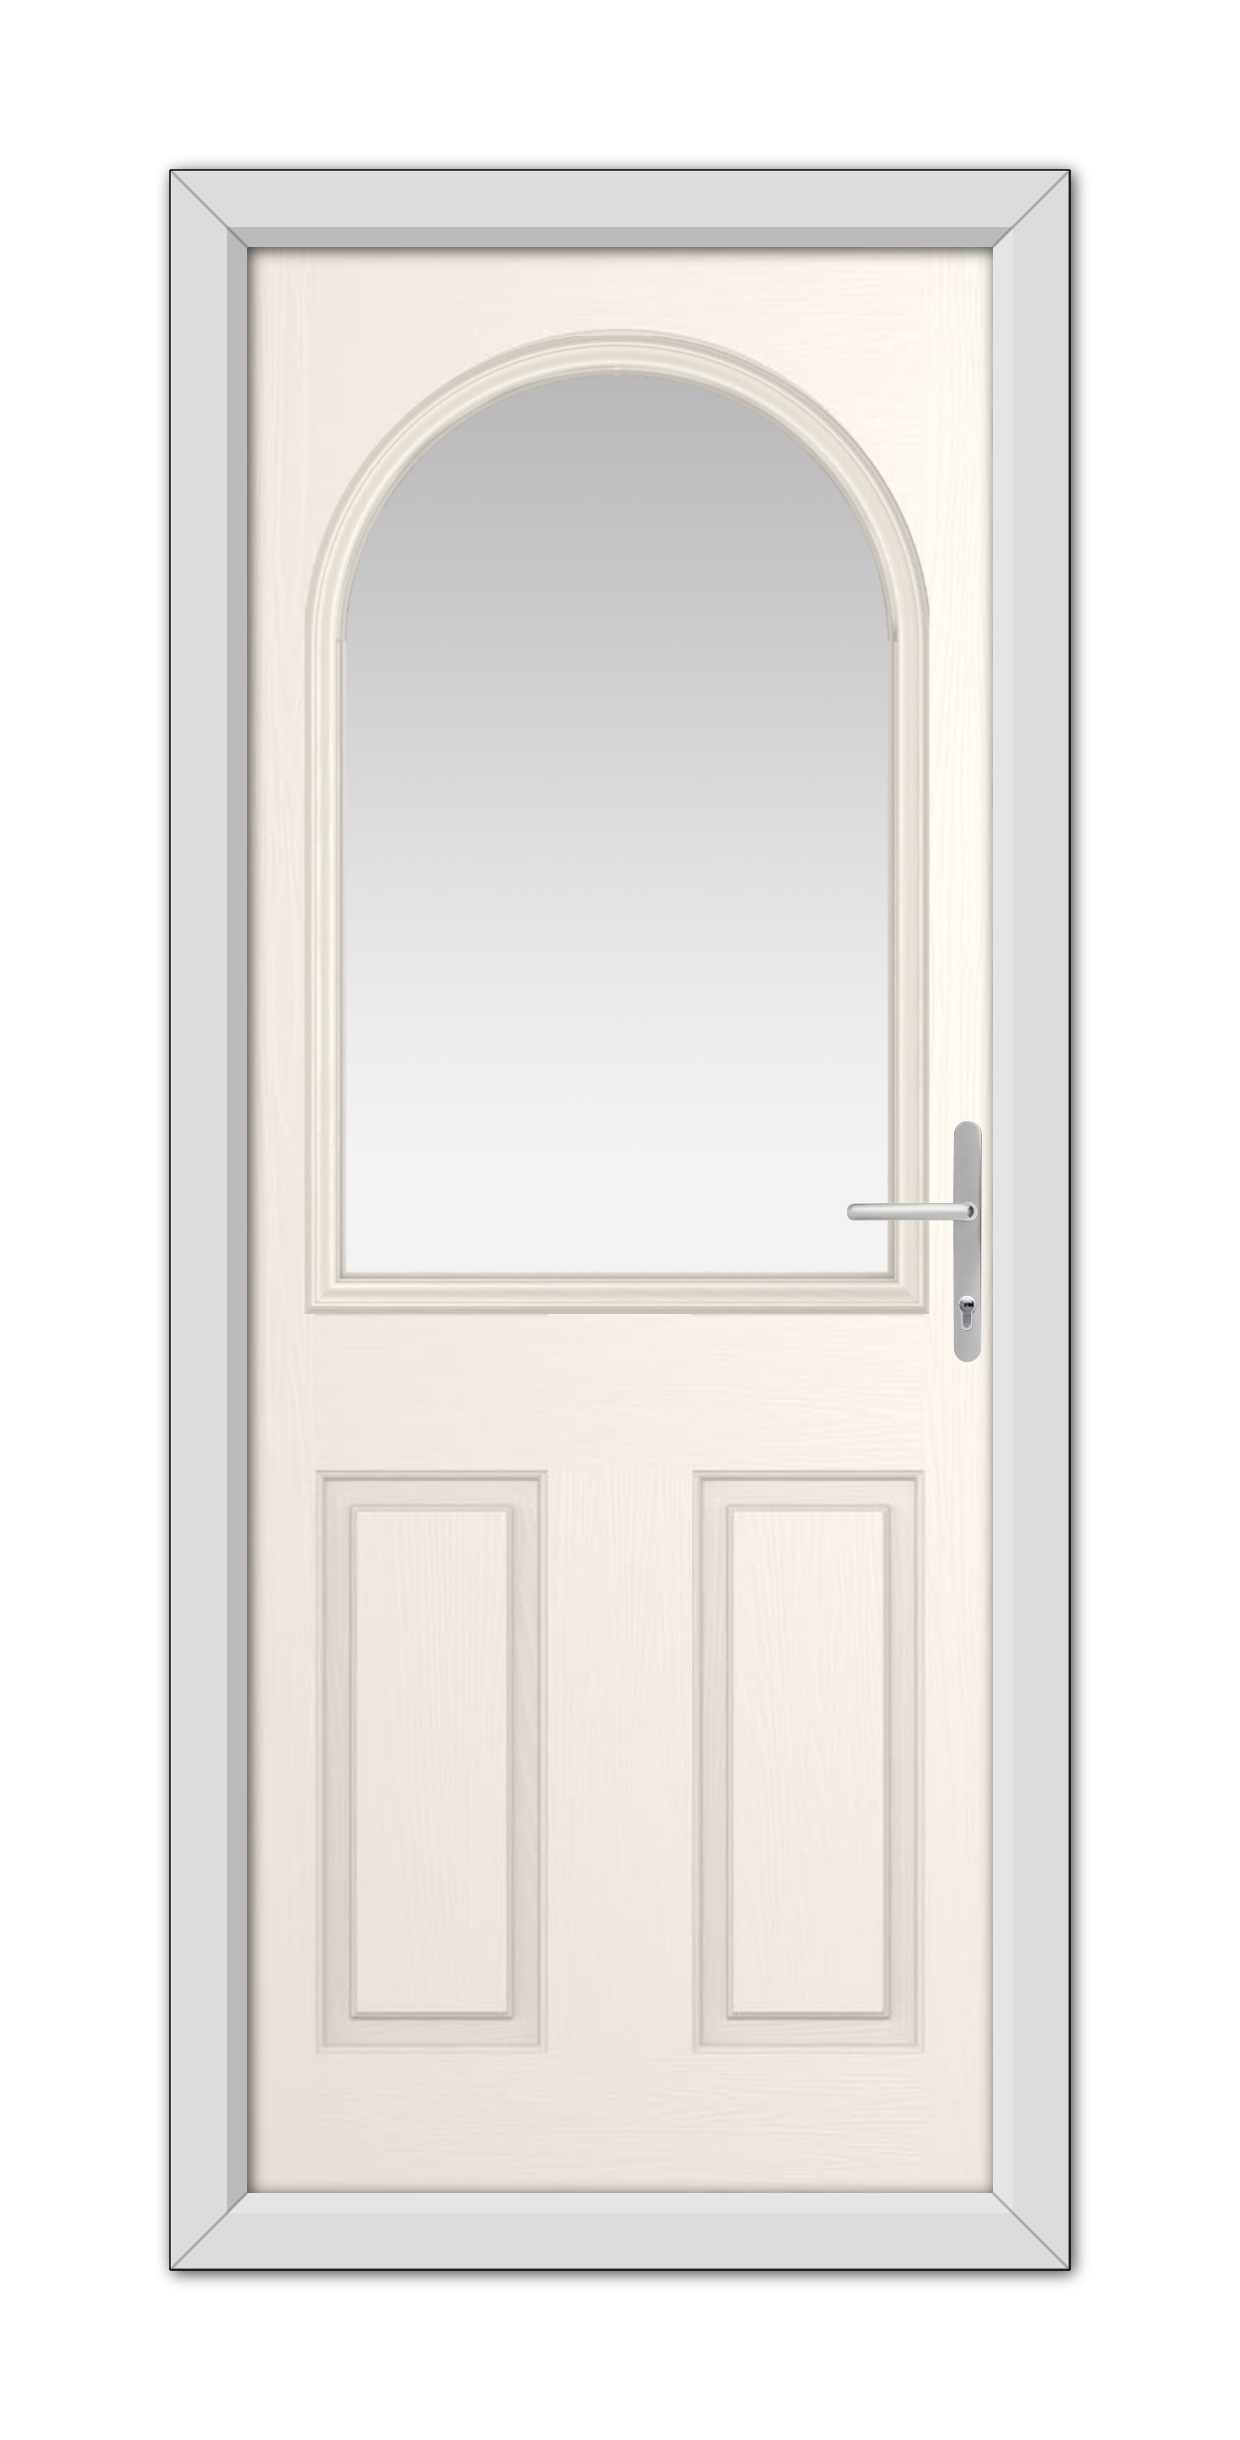 A White Foil Grafton Composite Door 48mm Timber Core with a semicircular glass pane at the top, equipped with a metal handle, housed within a simple frame.